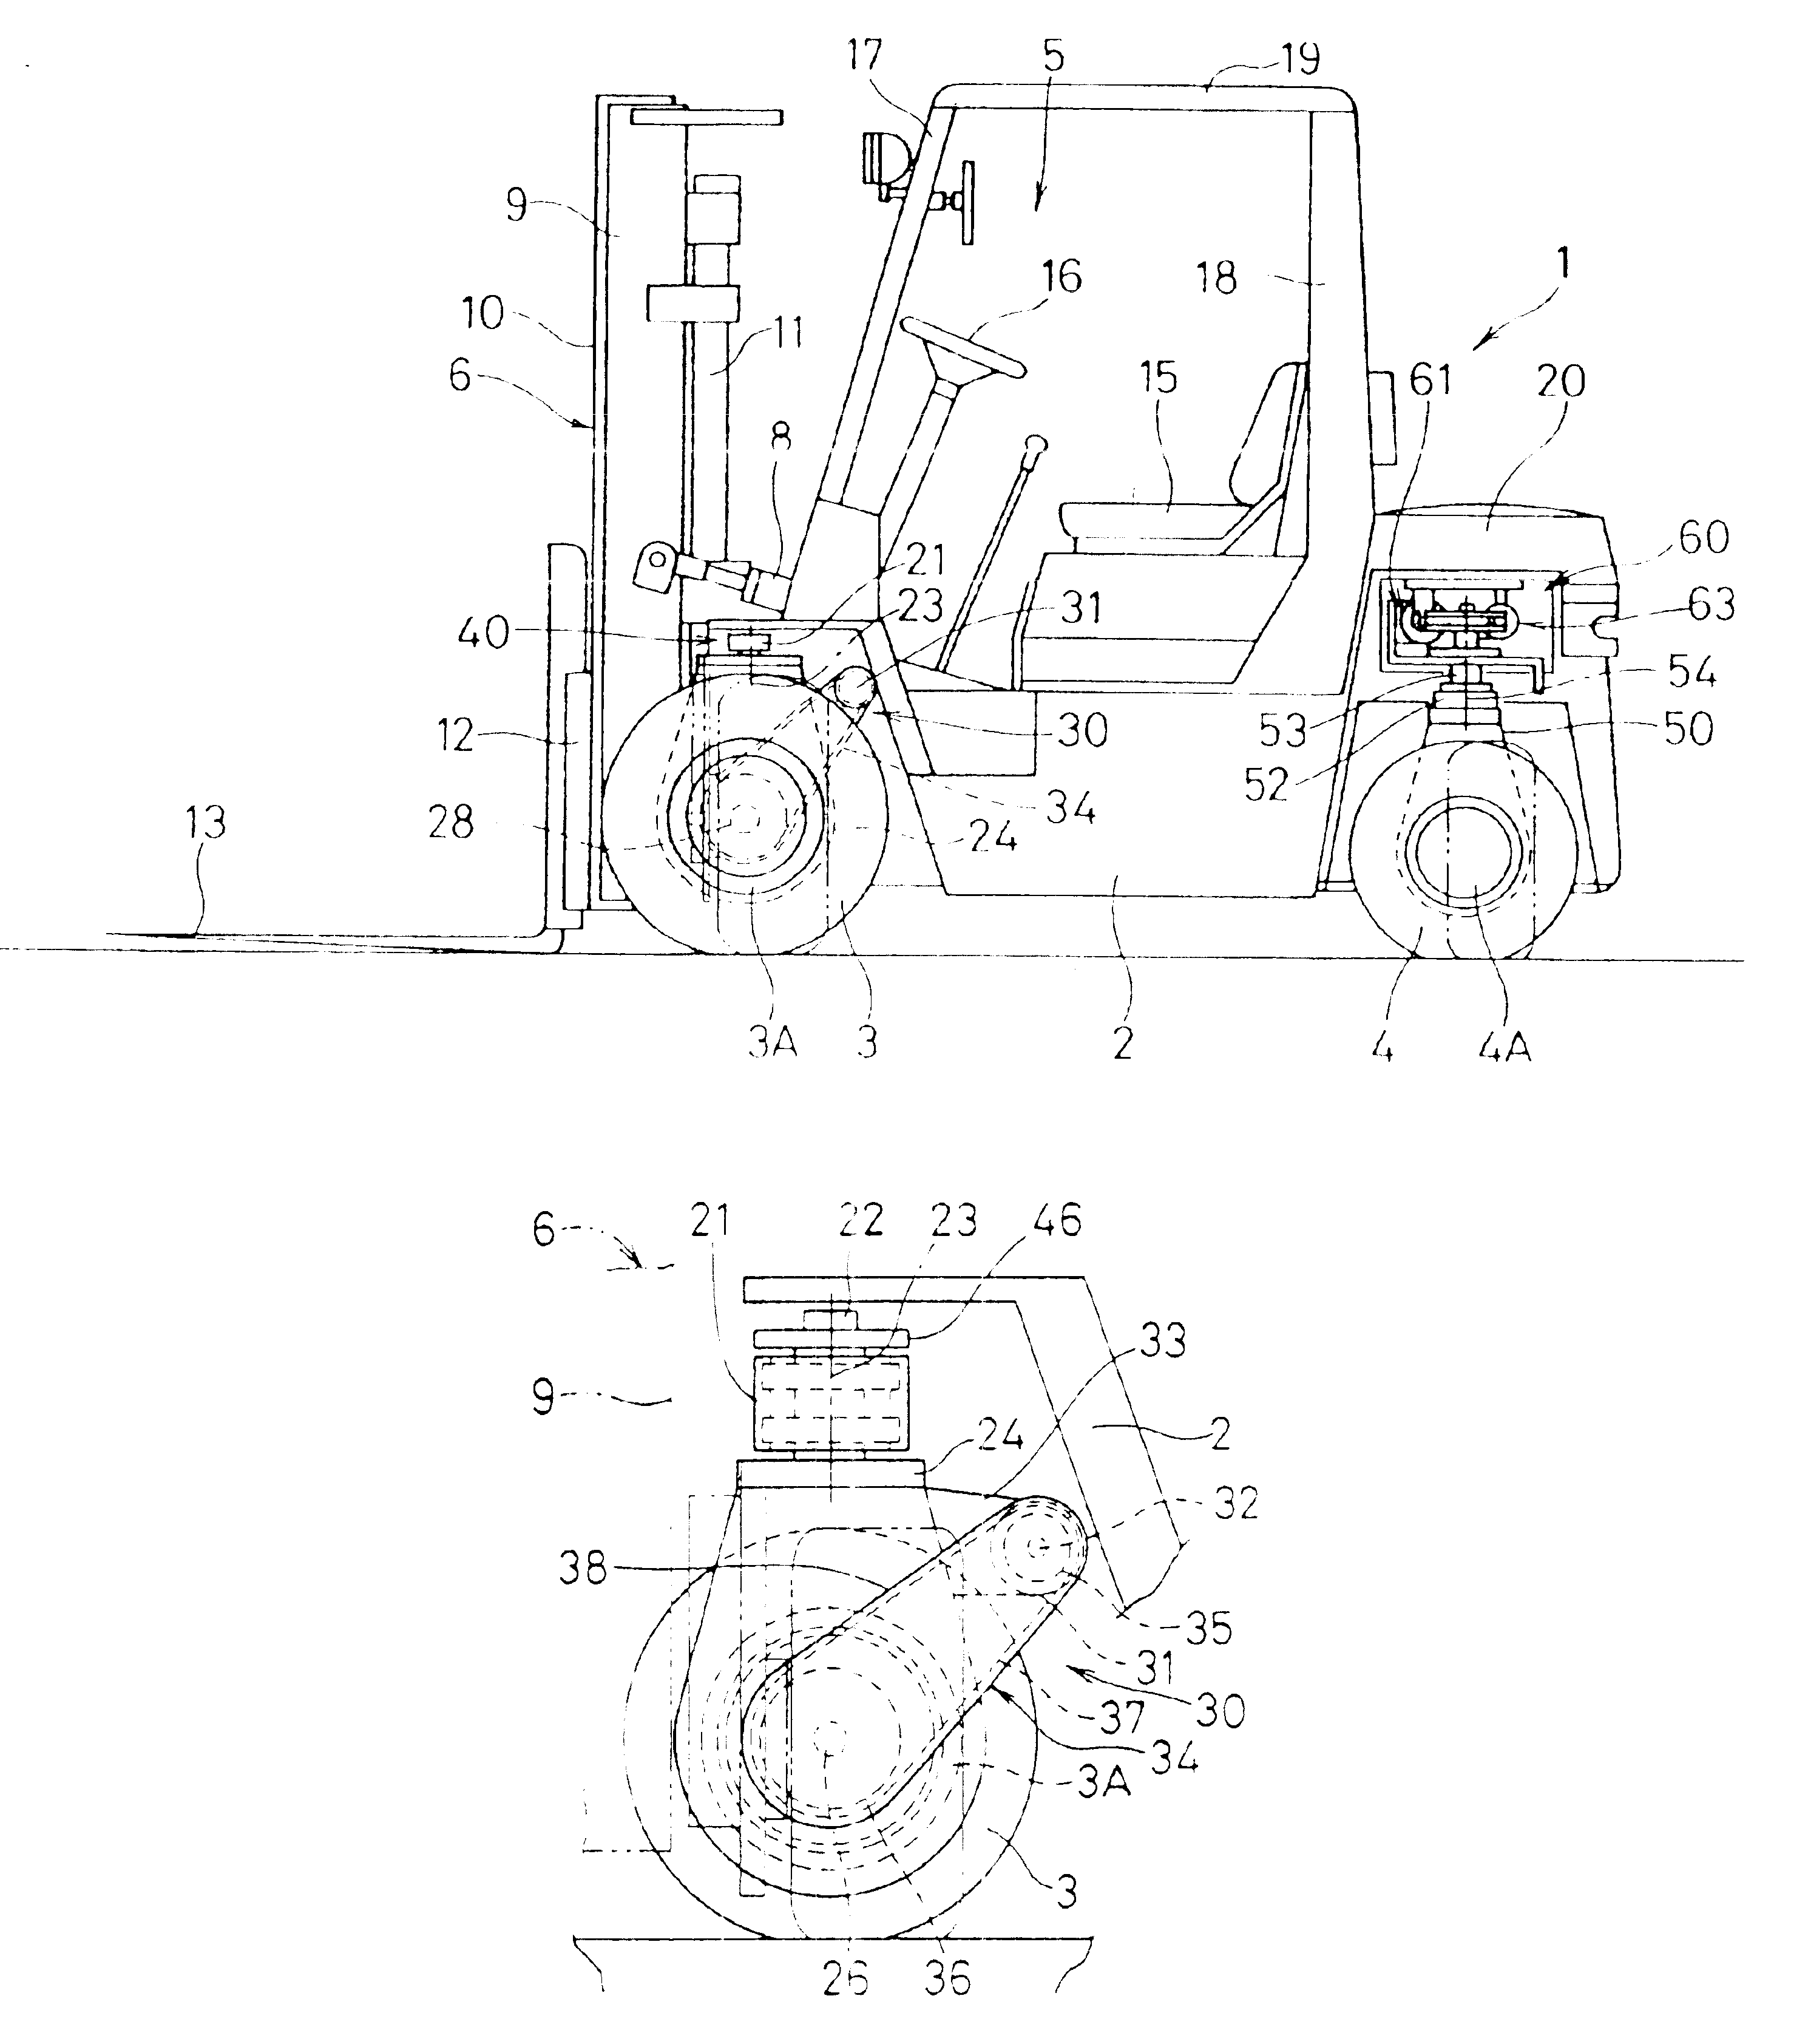 Forklift with transverse travel system